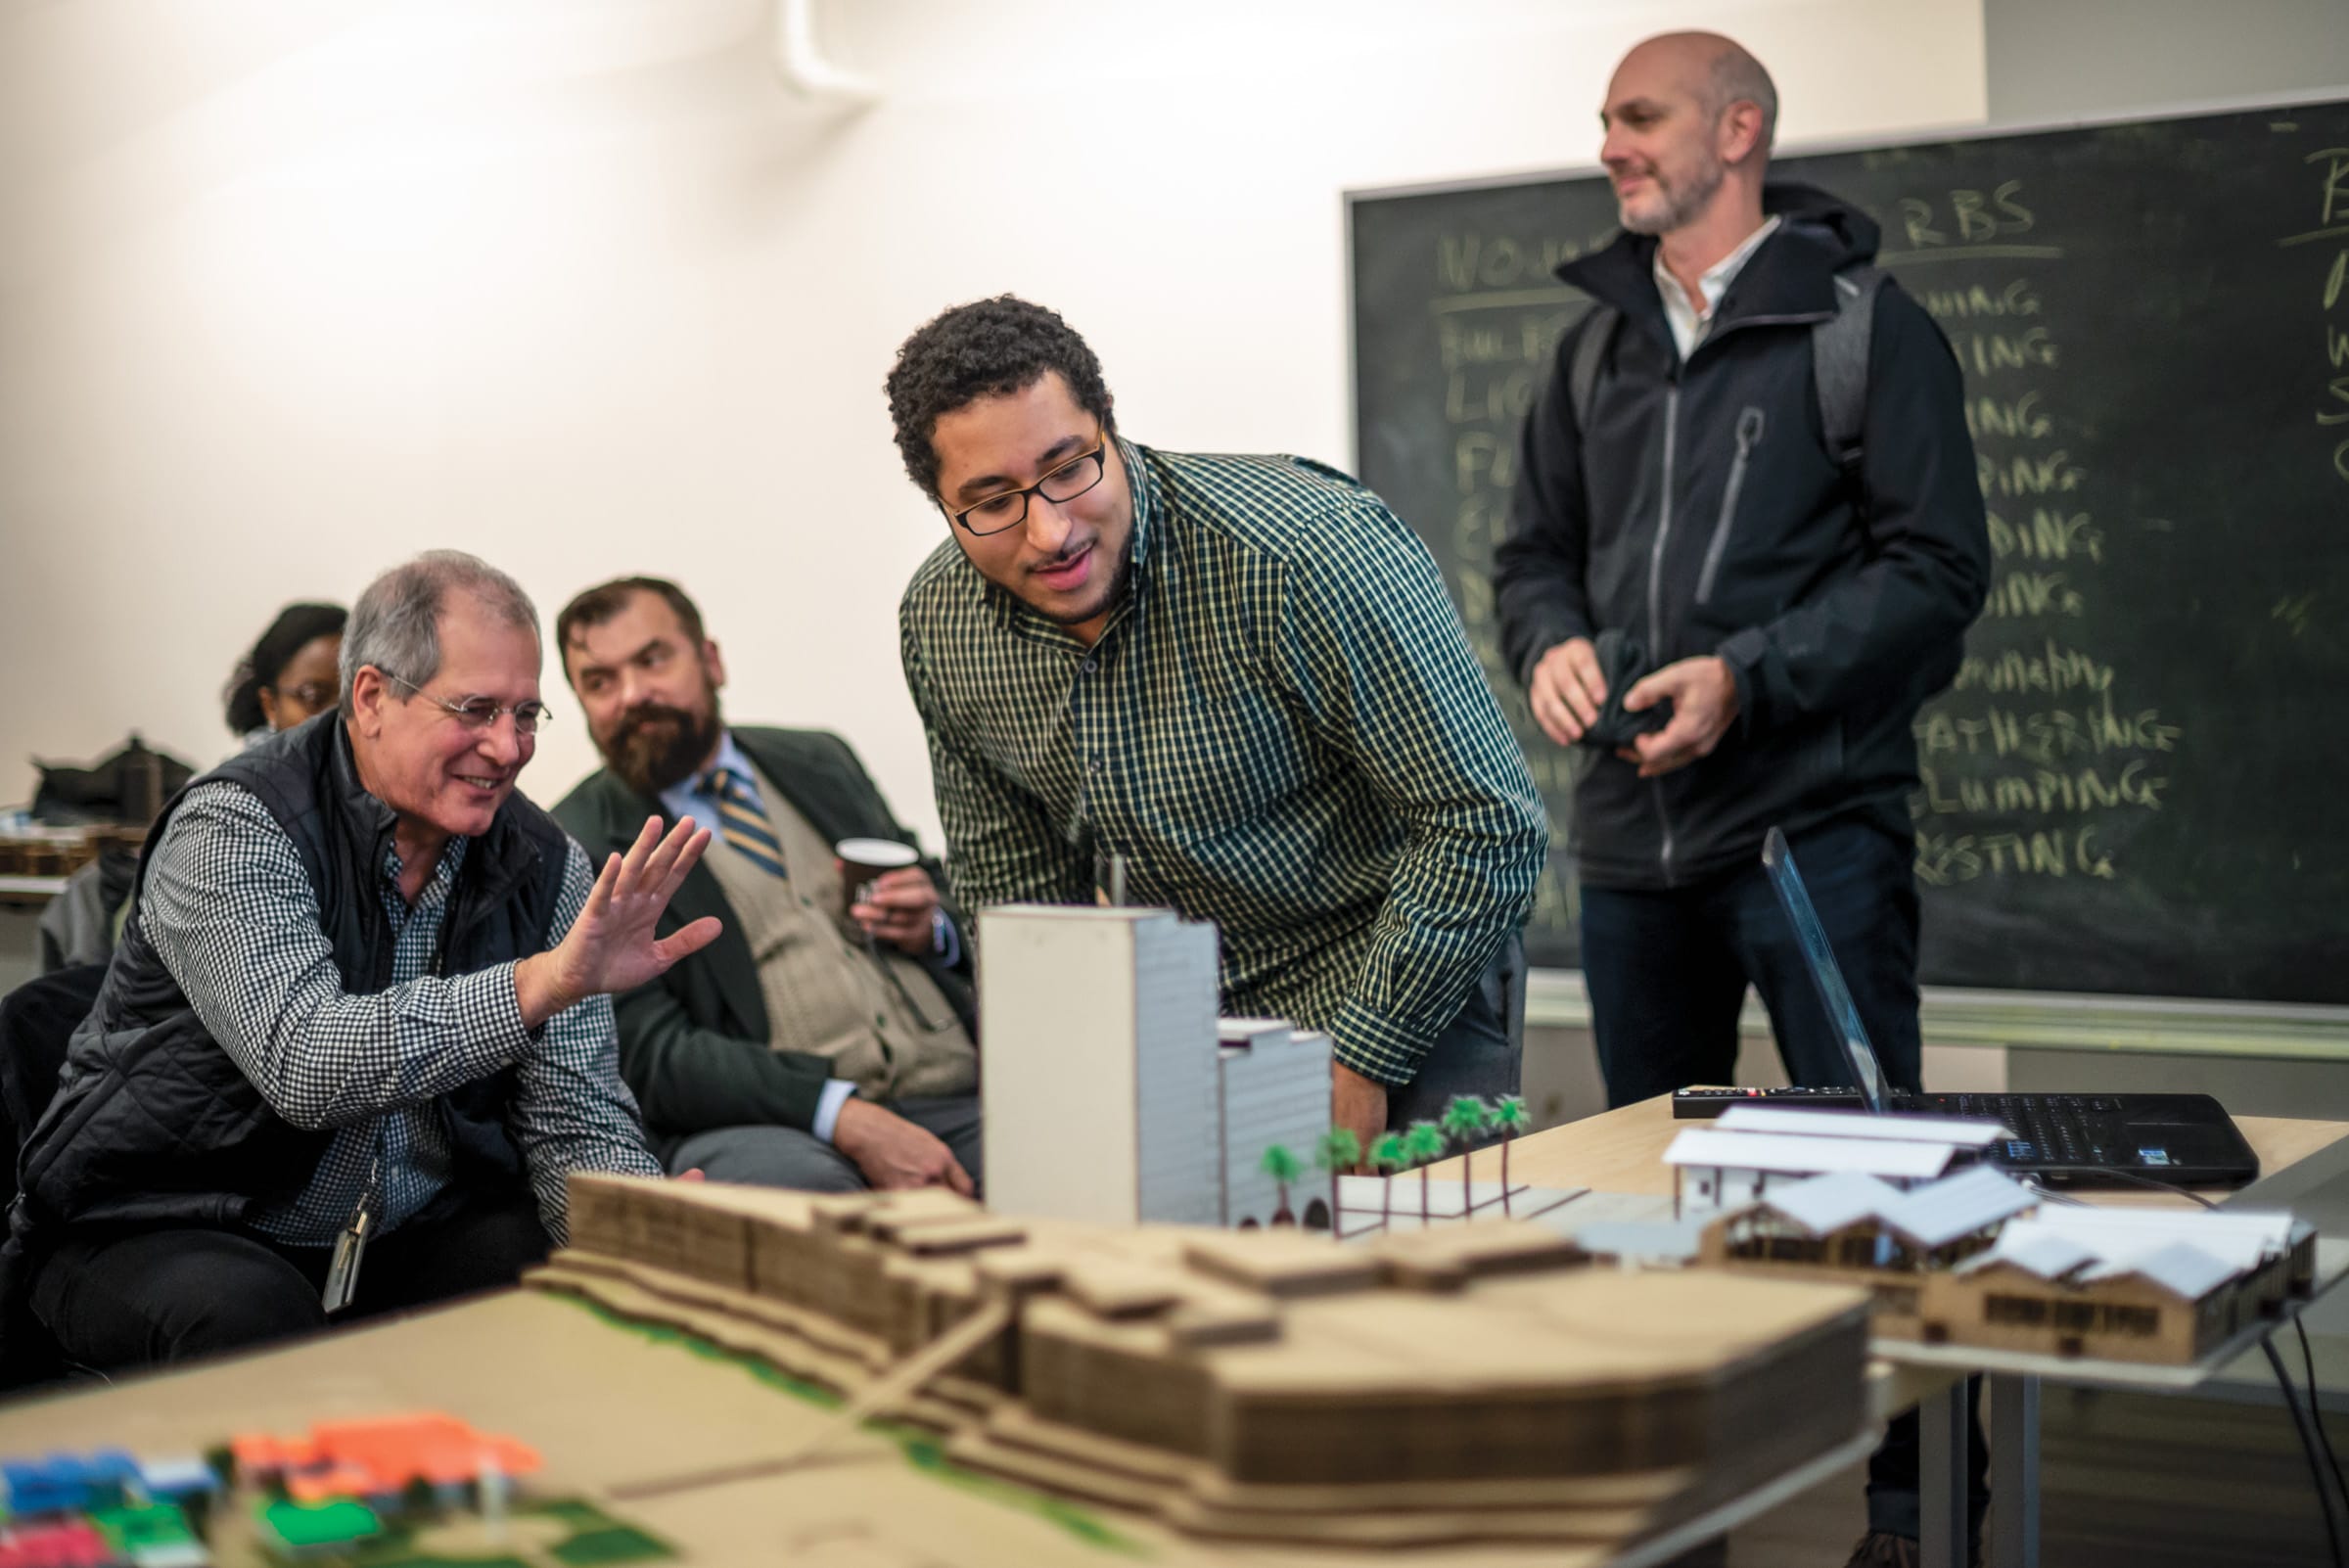 An architect gestures towards an architectural model while speaking to a student.